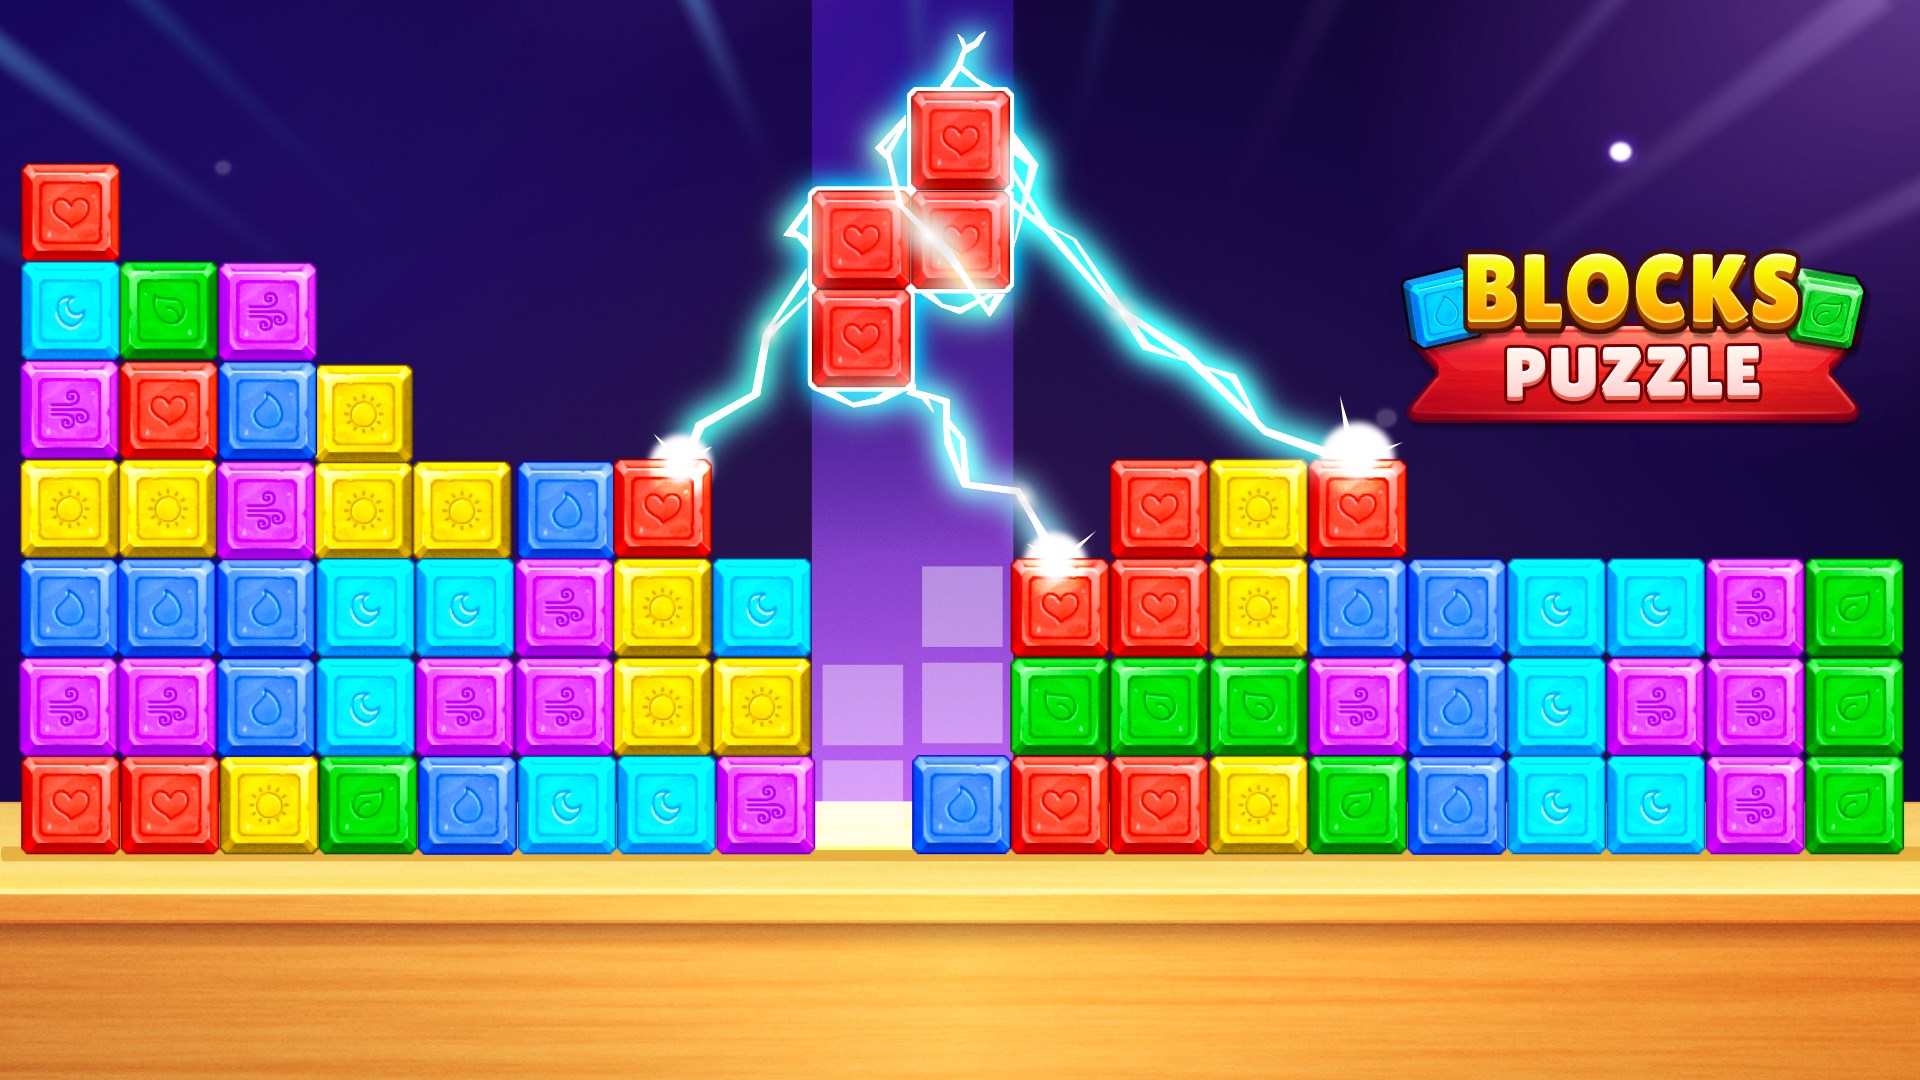 Play Puzzle Games Online on PC & Mobile (FREE)